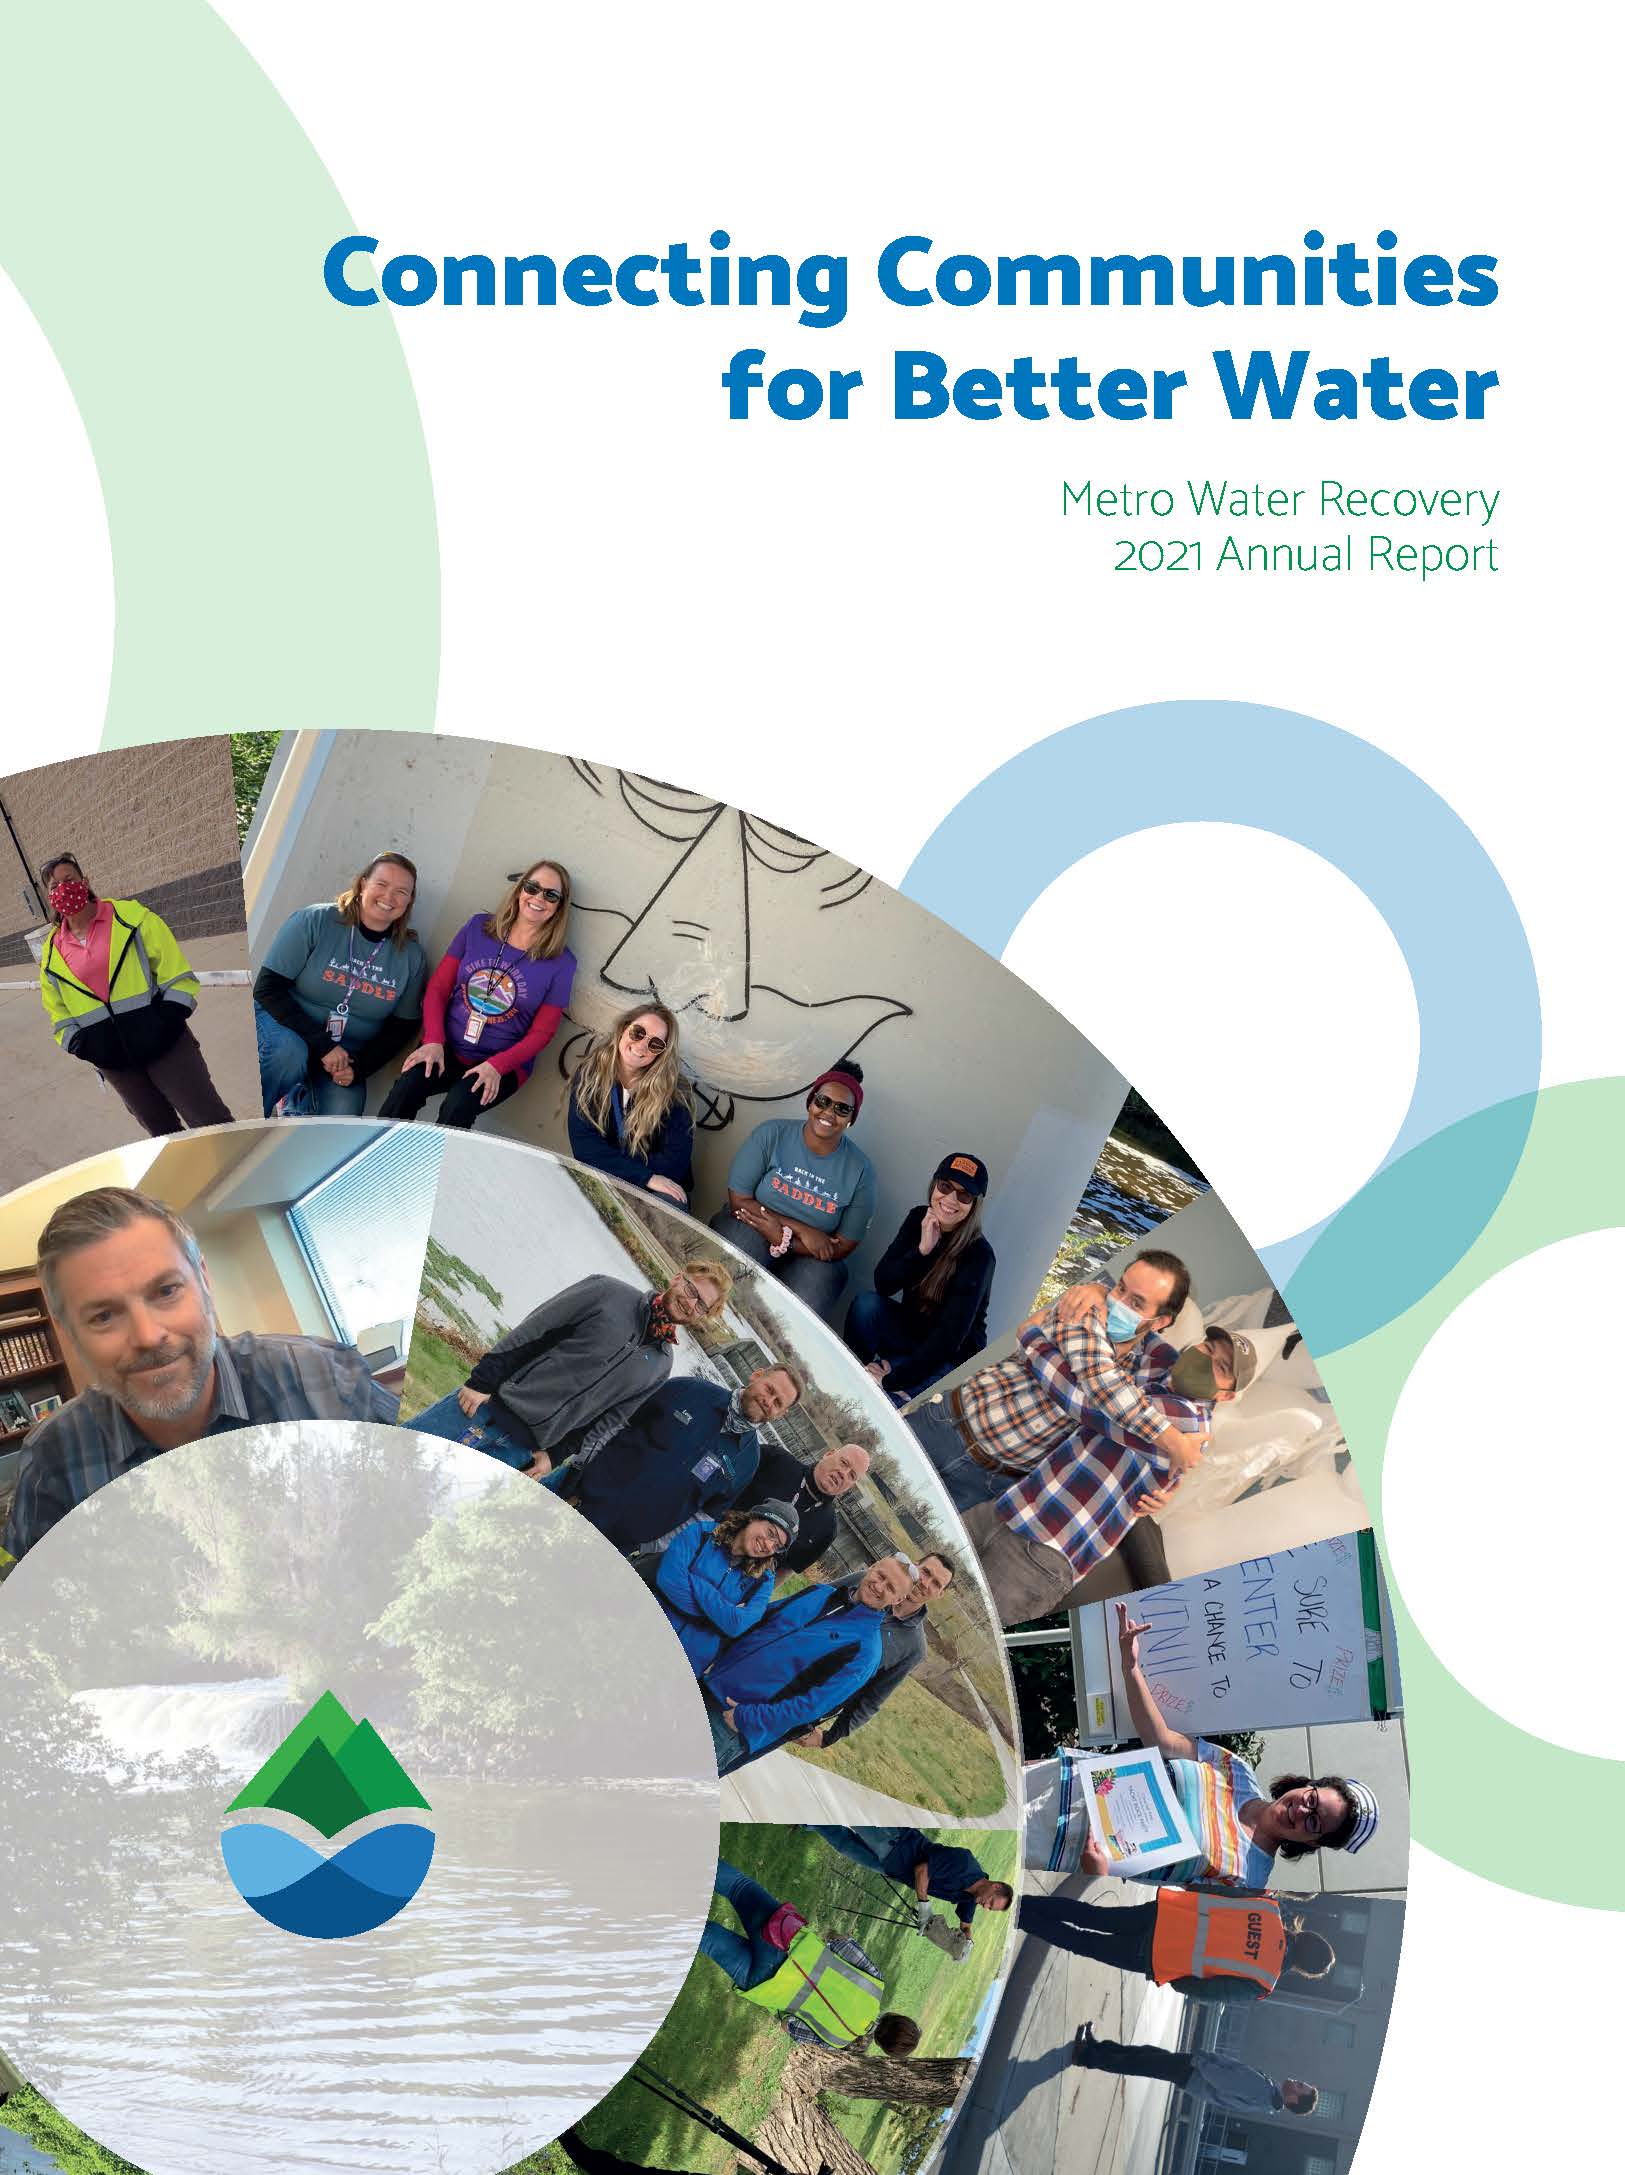 Our 2021 Annual Report Is Online